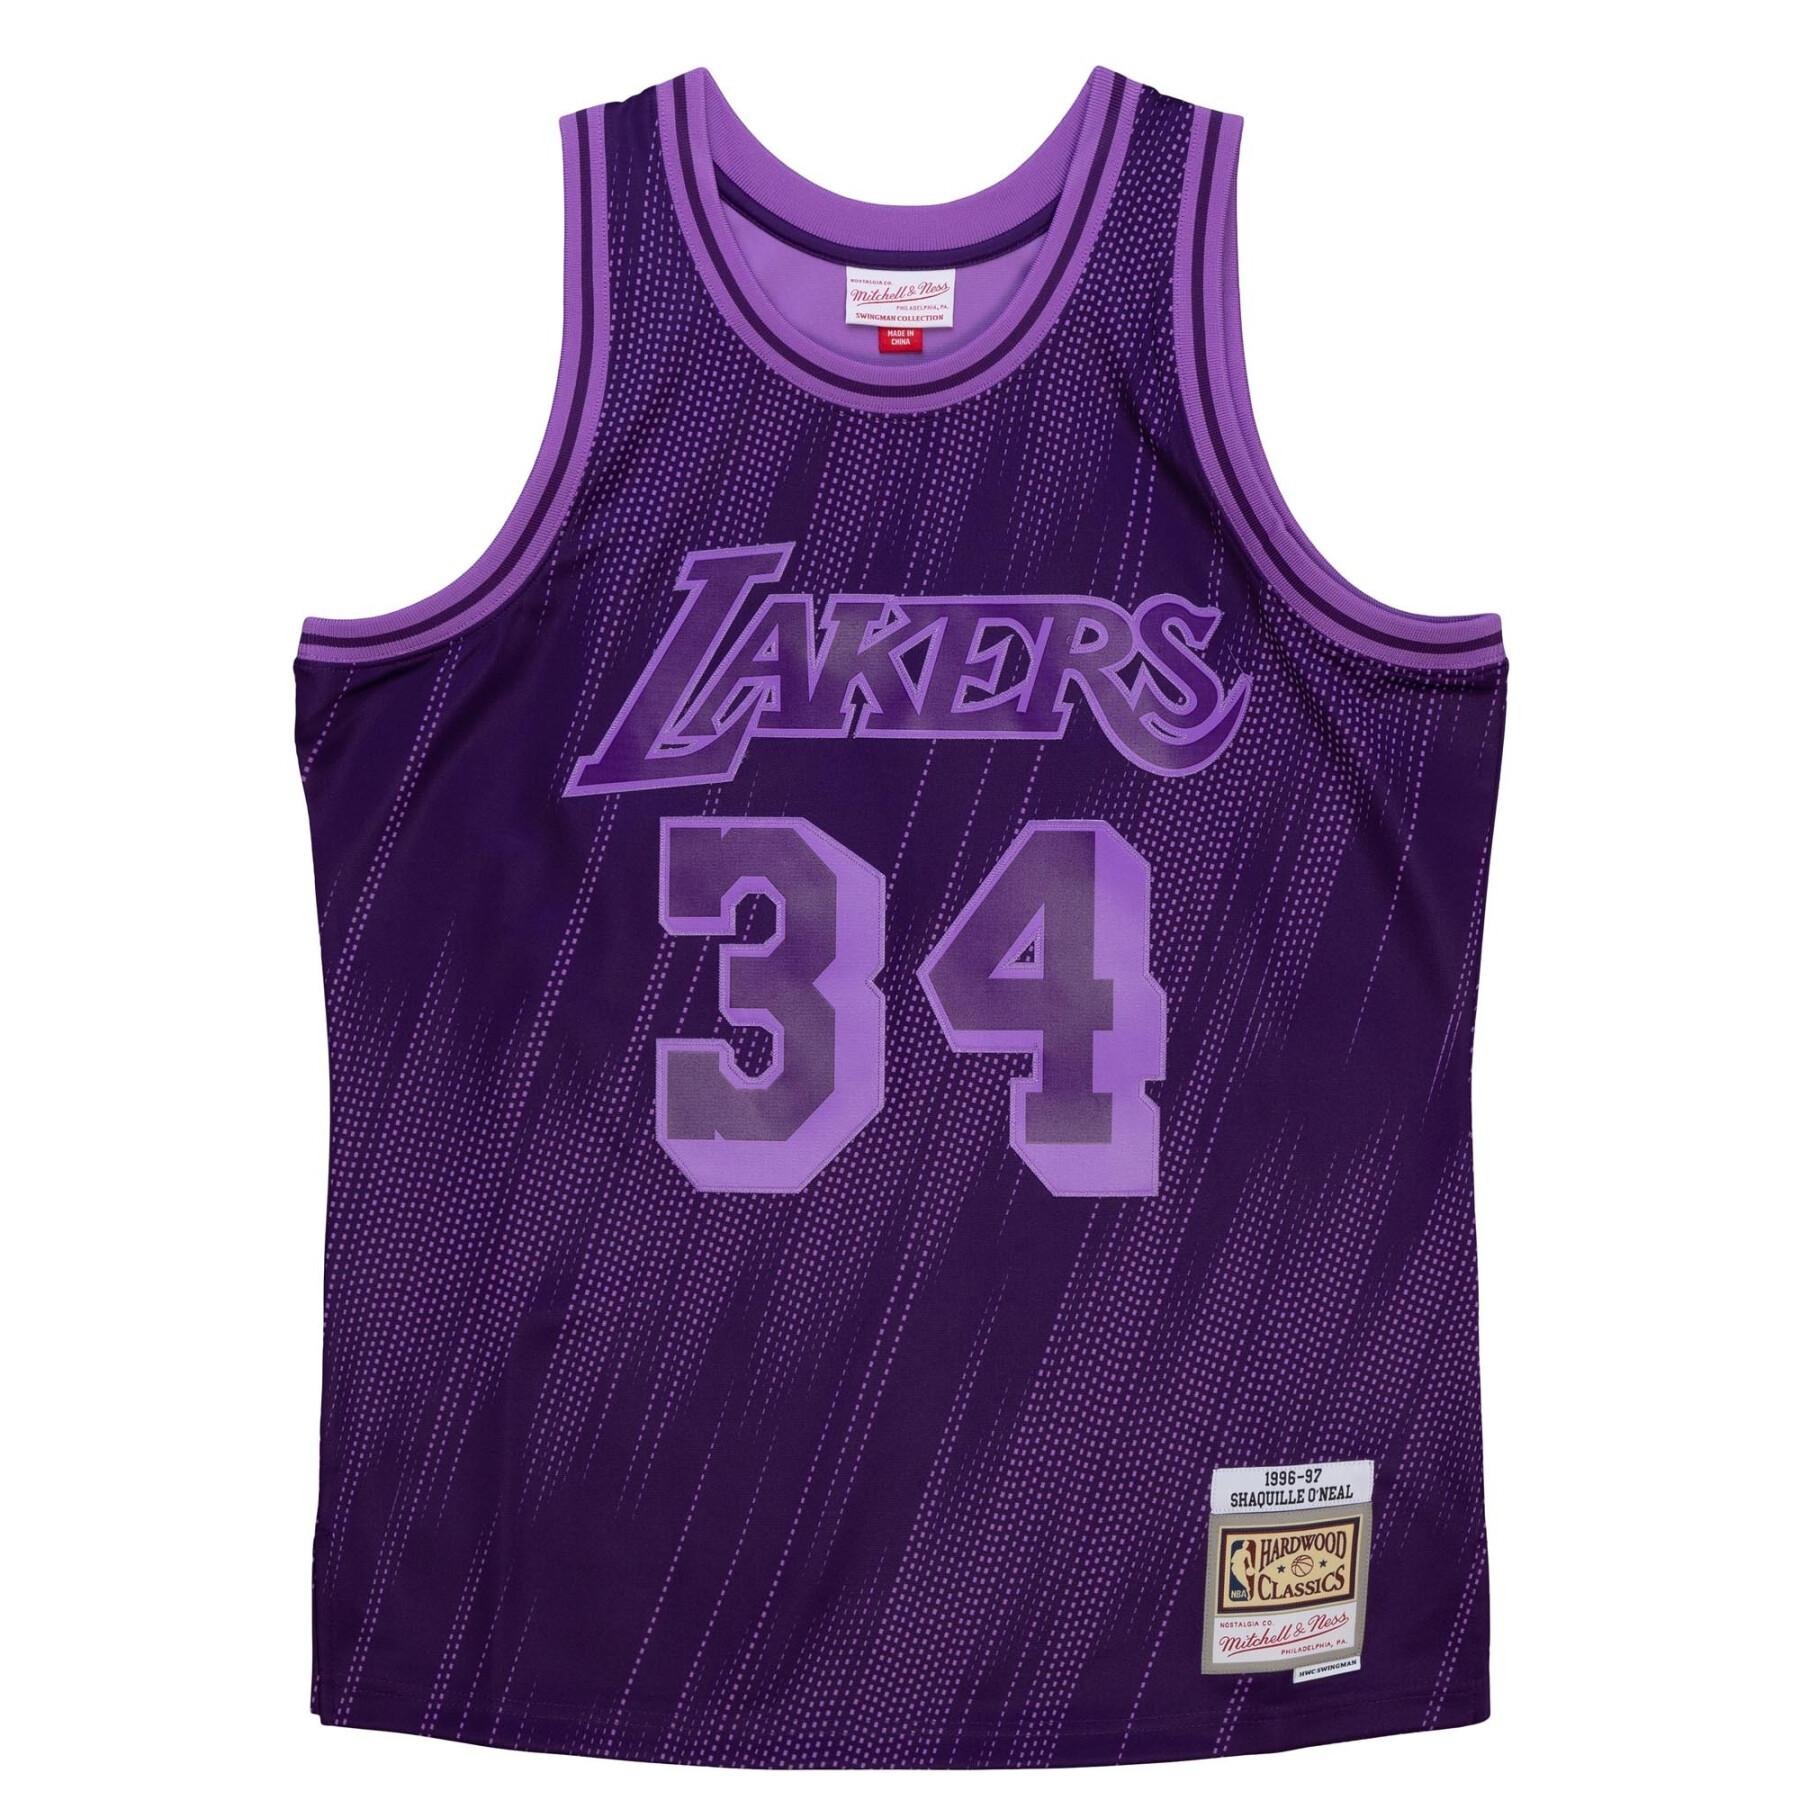 Maillot NBA Shaquille O'neal Los Angeles Lakers 1996-97 Mitchell & ness  Hardwood Classic Bleu Pour enfant